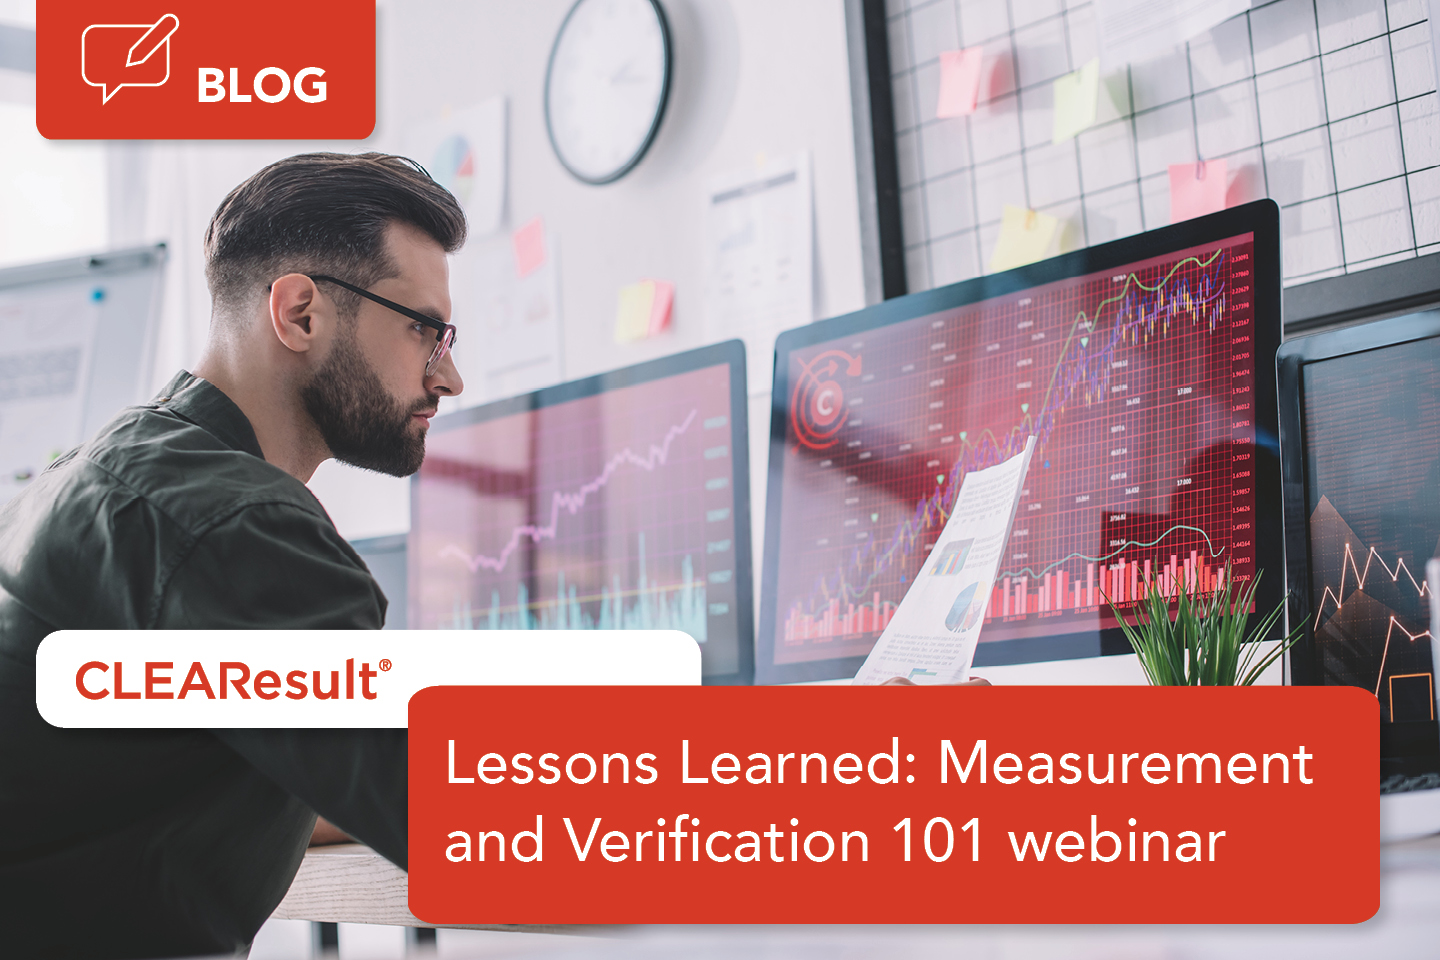 Key takeaways from our Measurement and Verification 101 webinar